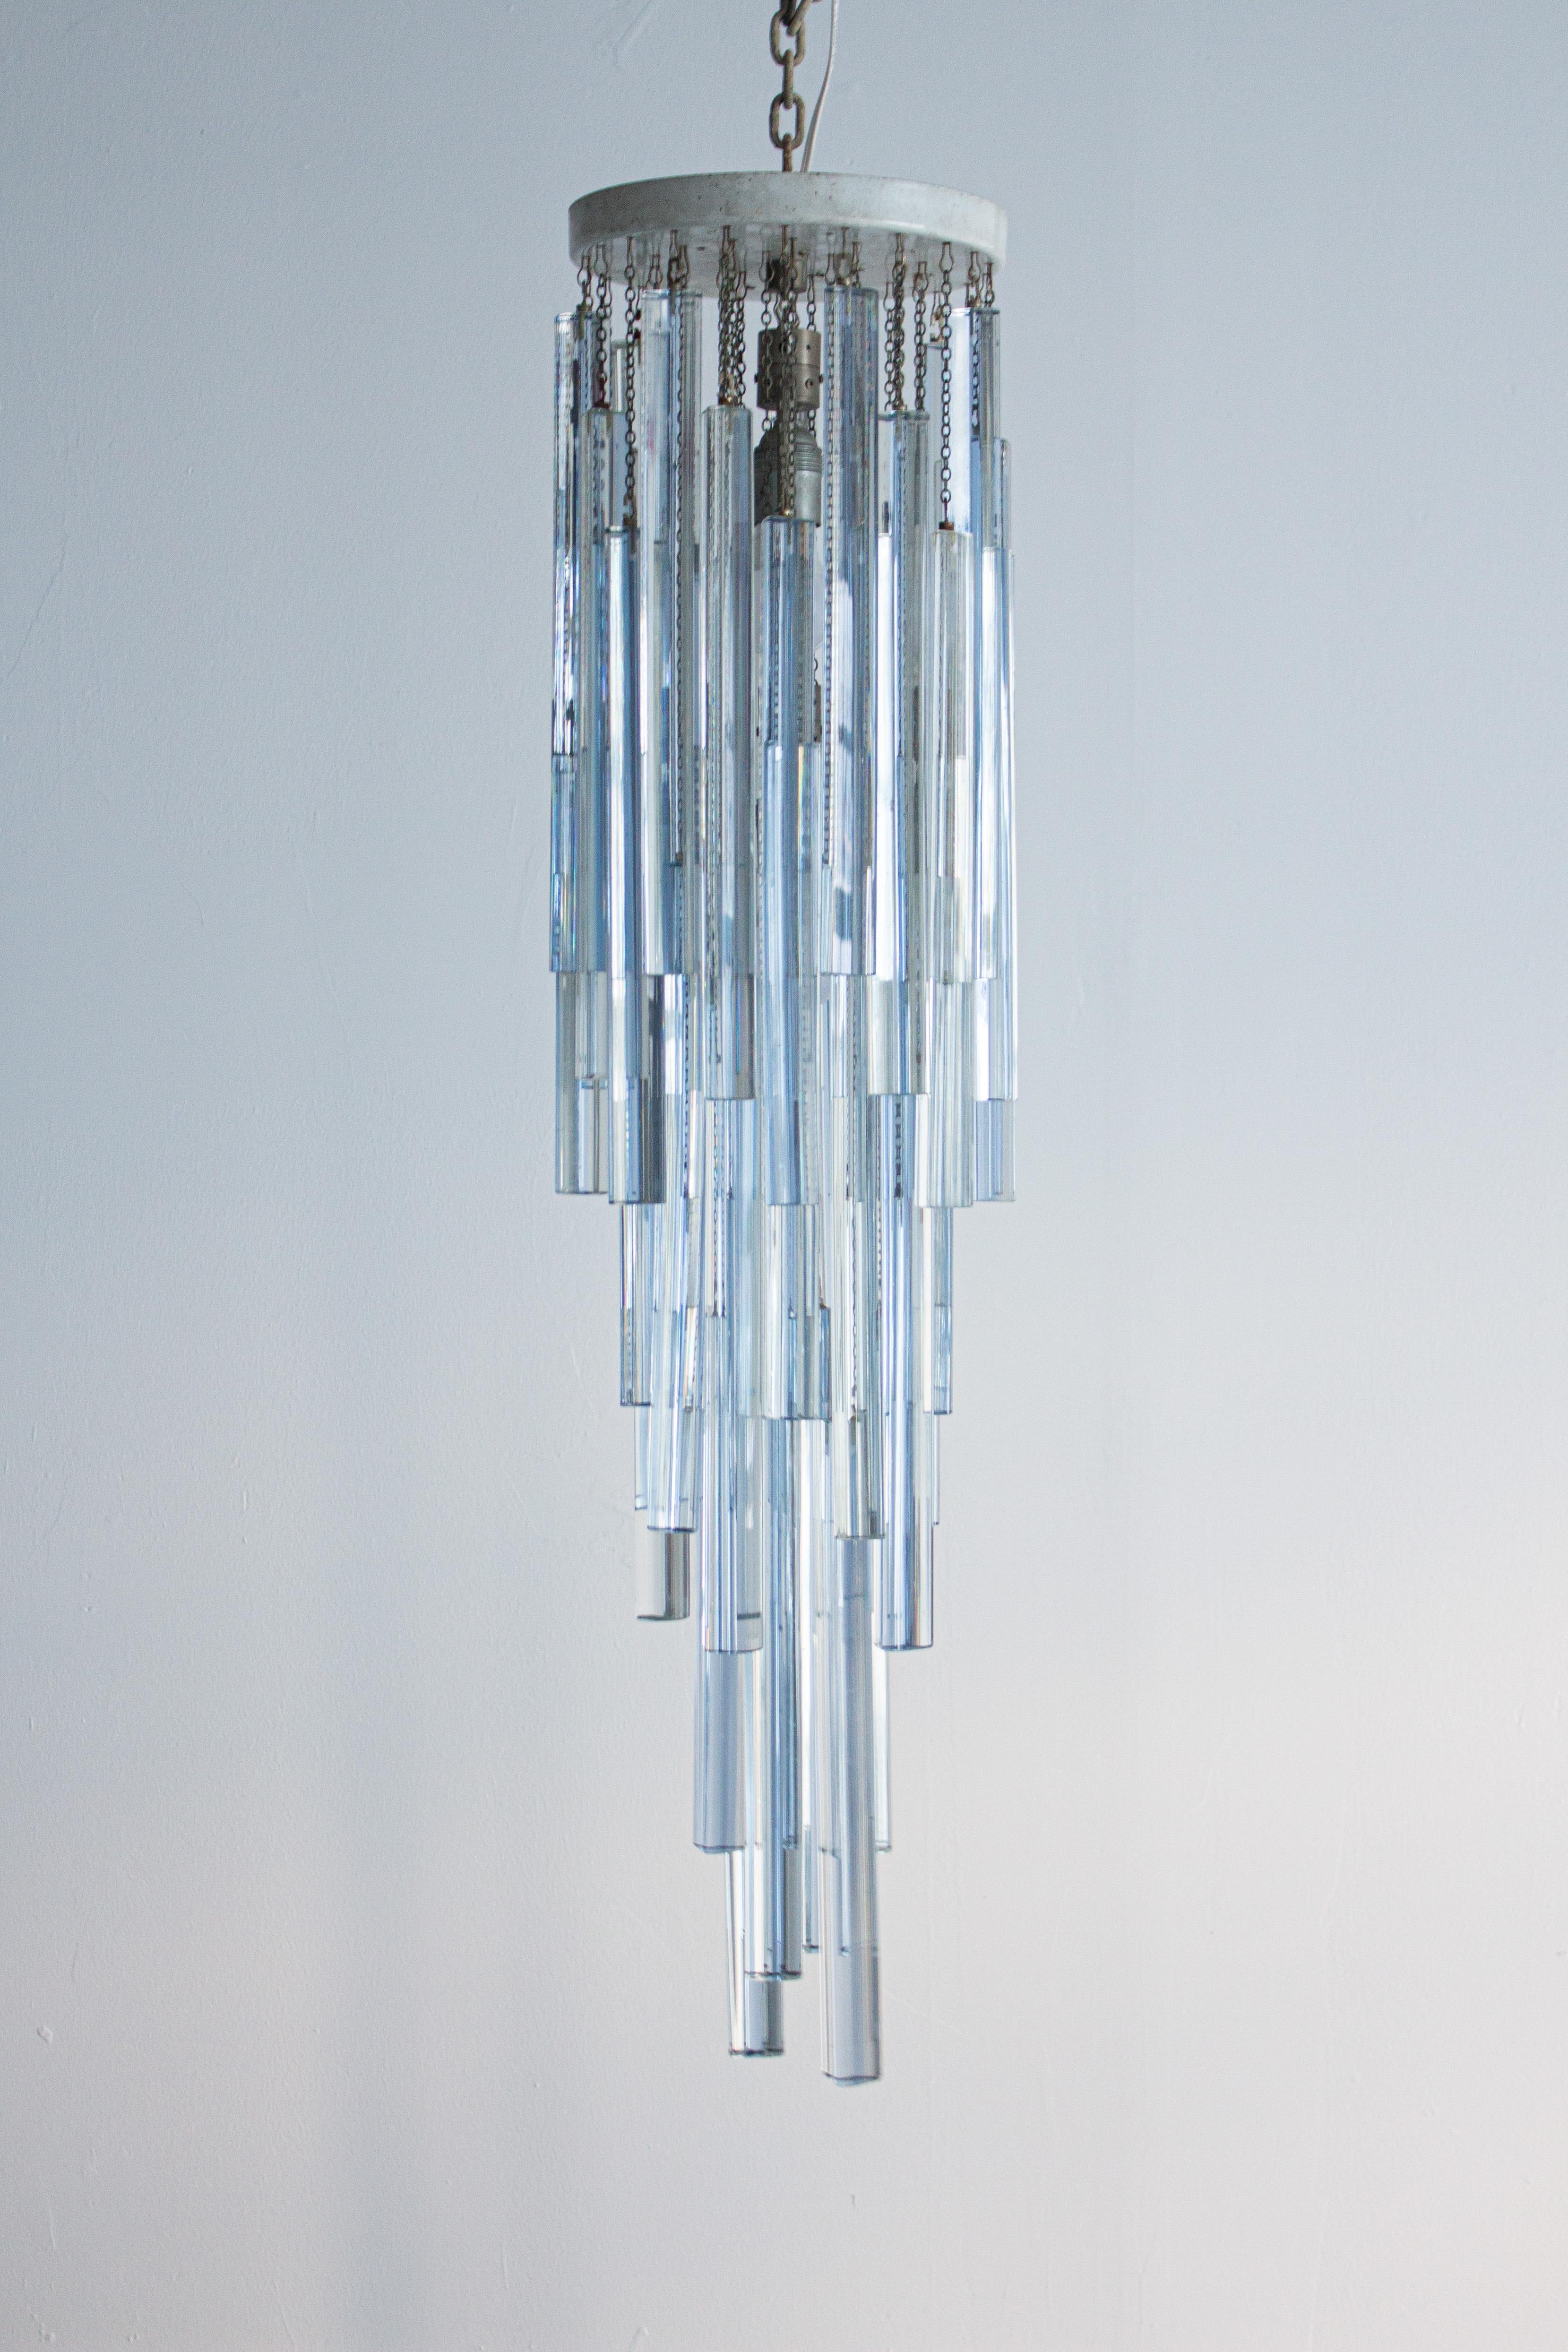 A Venini Murano glass chandelier. Cascading “triedri” prisms in both ice blue and clear glass dangle from chains attached to the flush mount canopy. Several extra prisms included. Flush mount canopy measures 9.5” wide by 1.25” deep. Original wiring